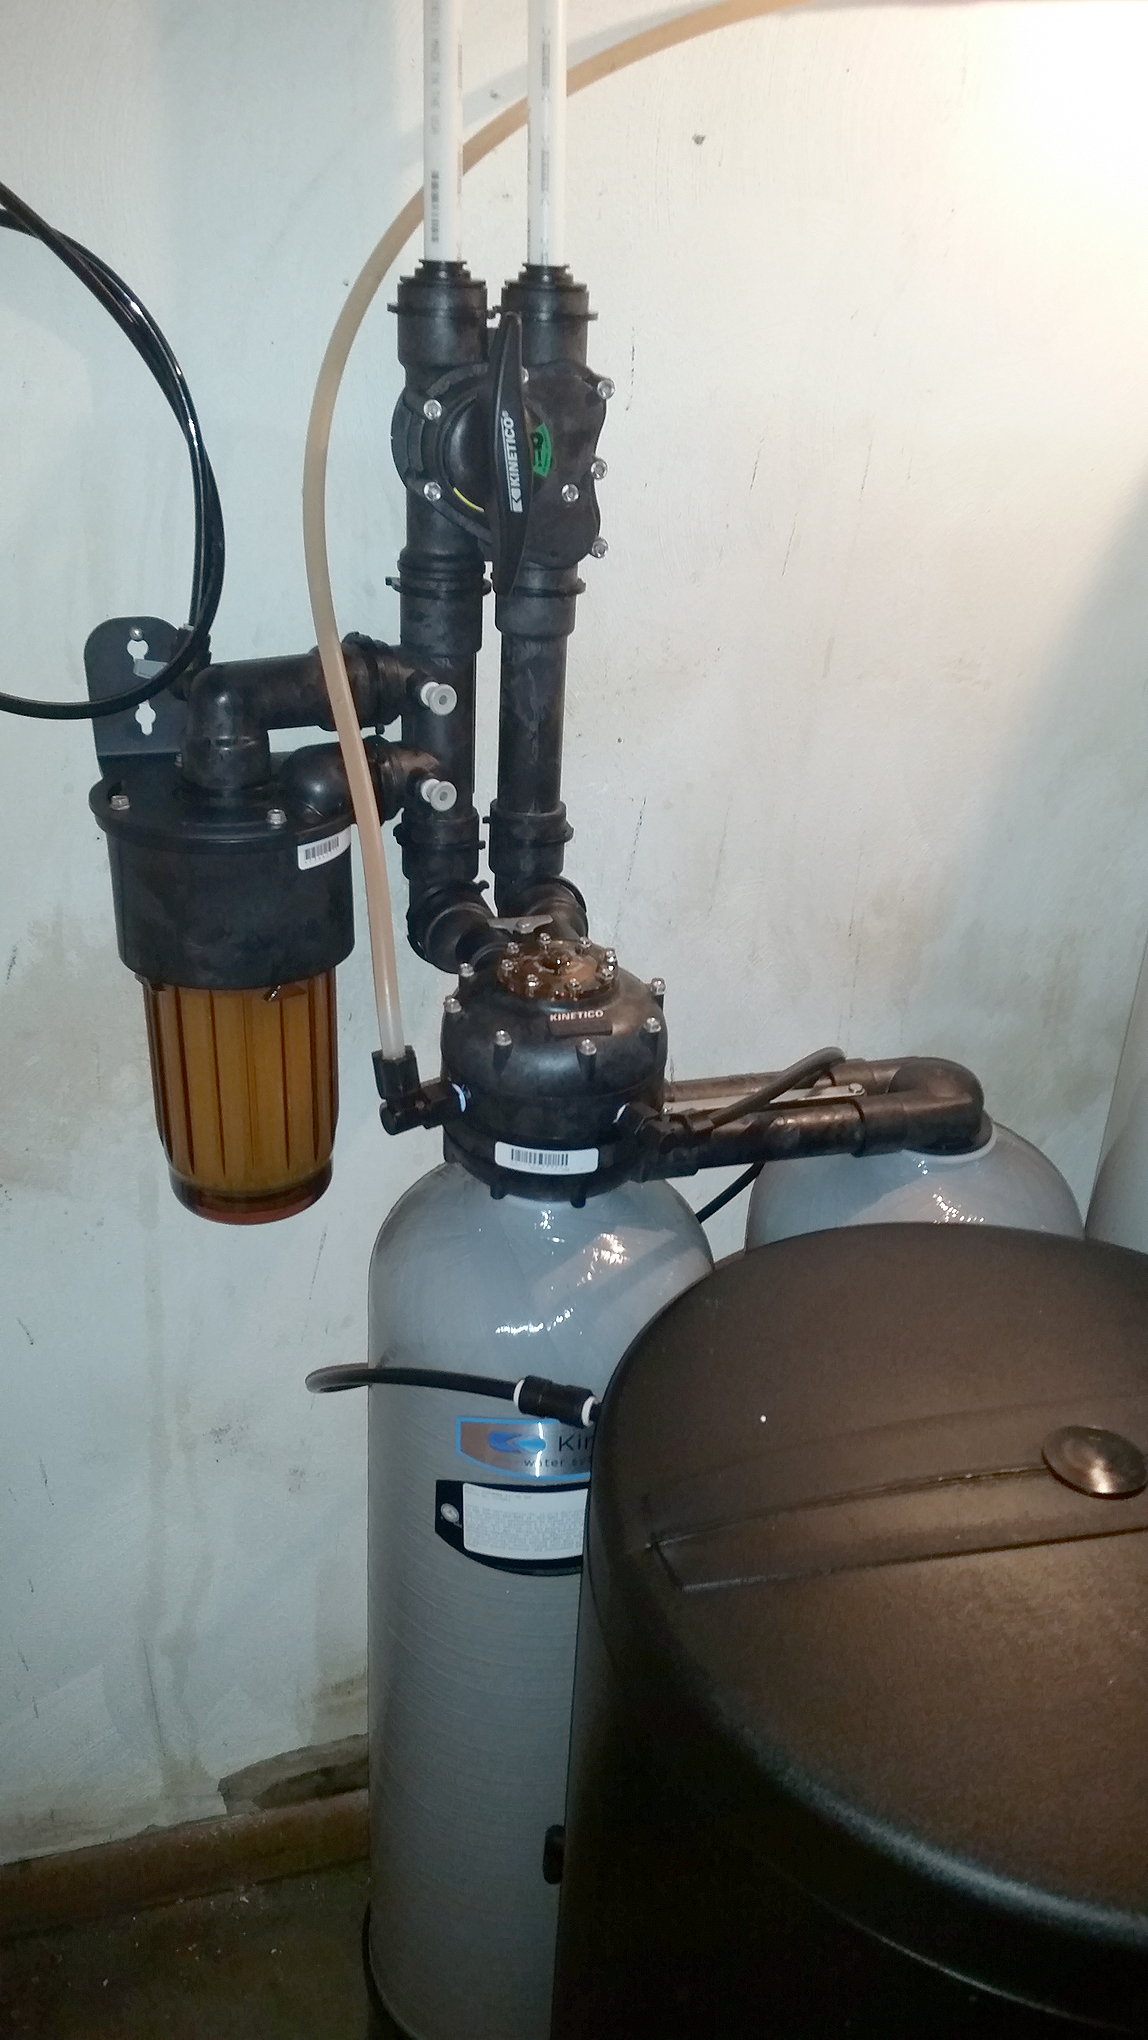 Installed Kinetico Signature series 935 water softener